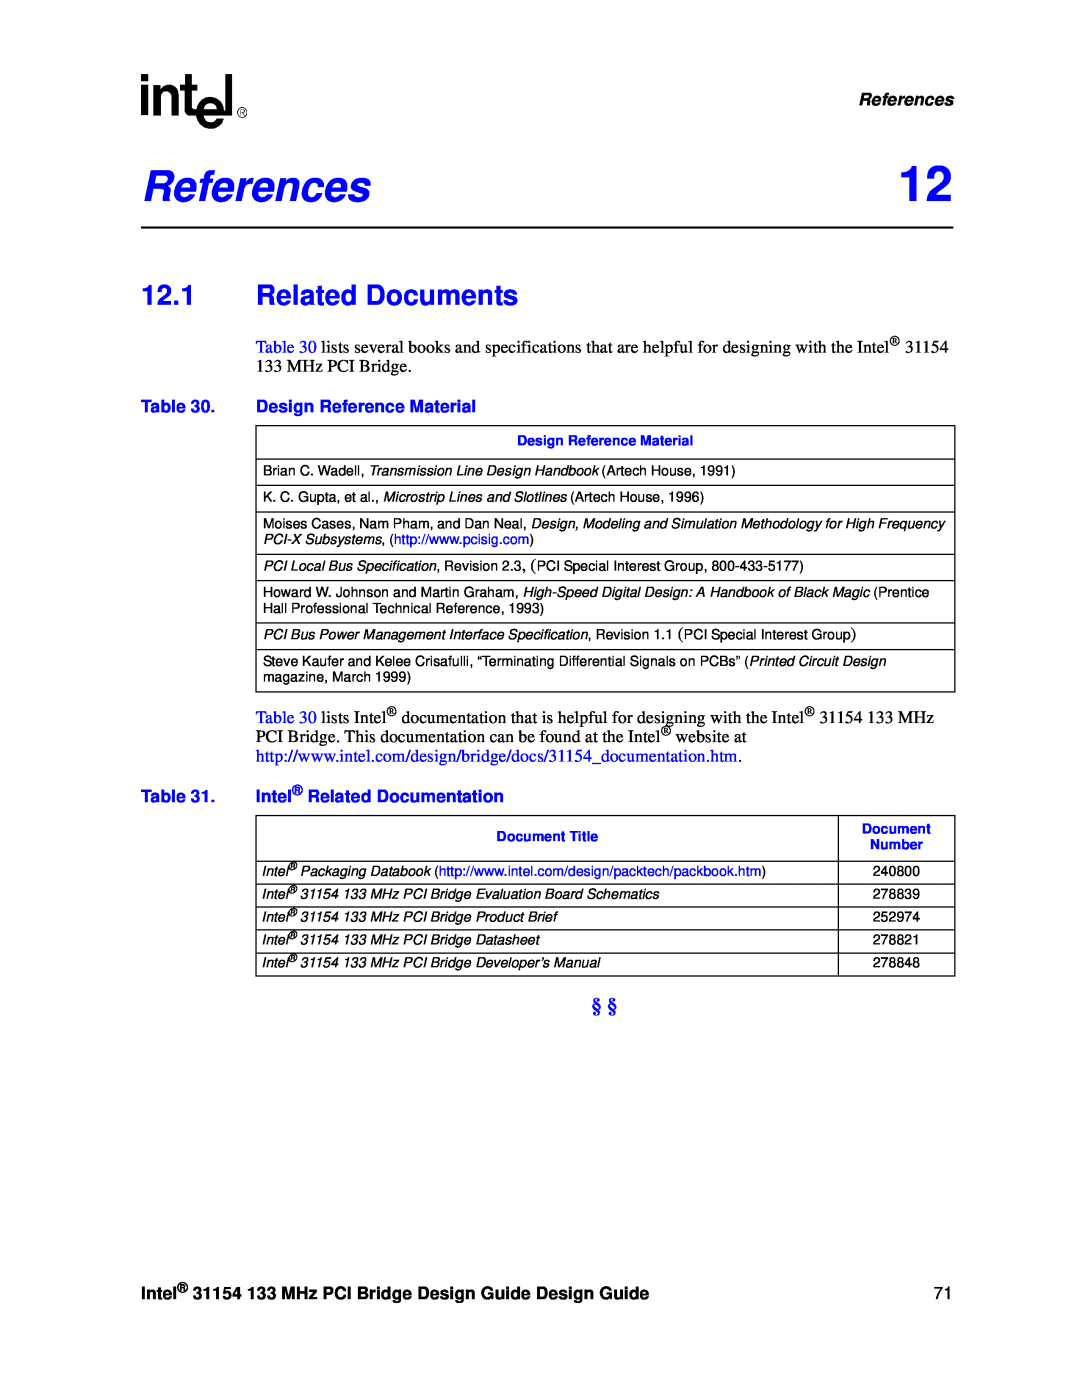 Intel 31154 manual References12, Related Documents, Design Reference Material, Intel Related Documentation, Document Title 